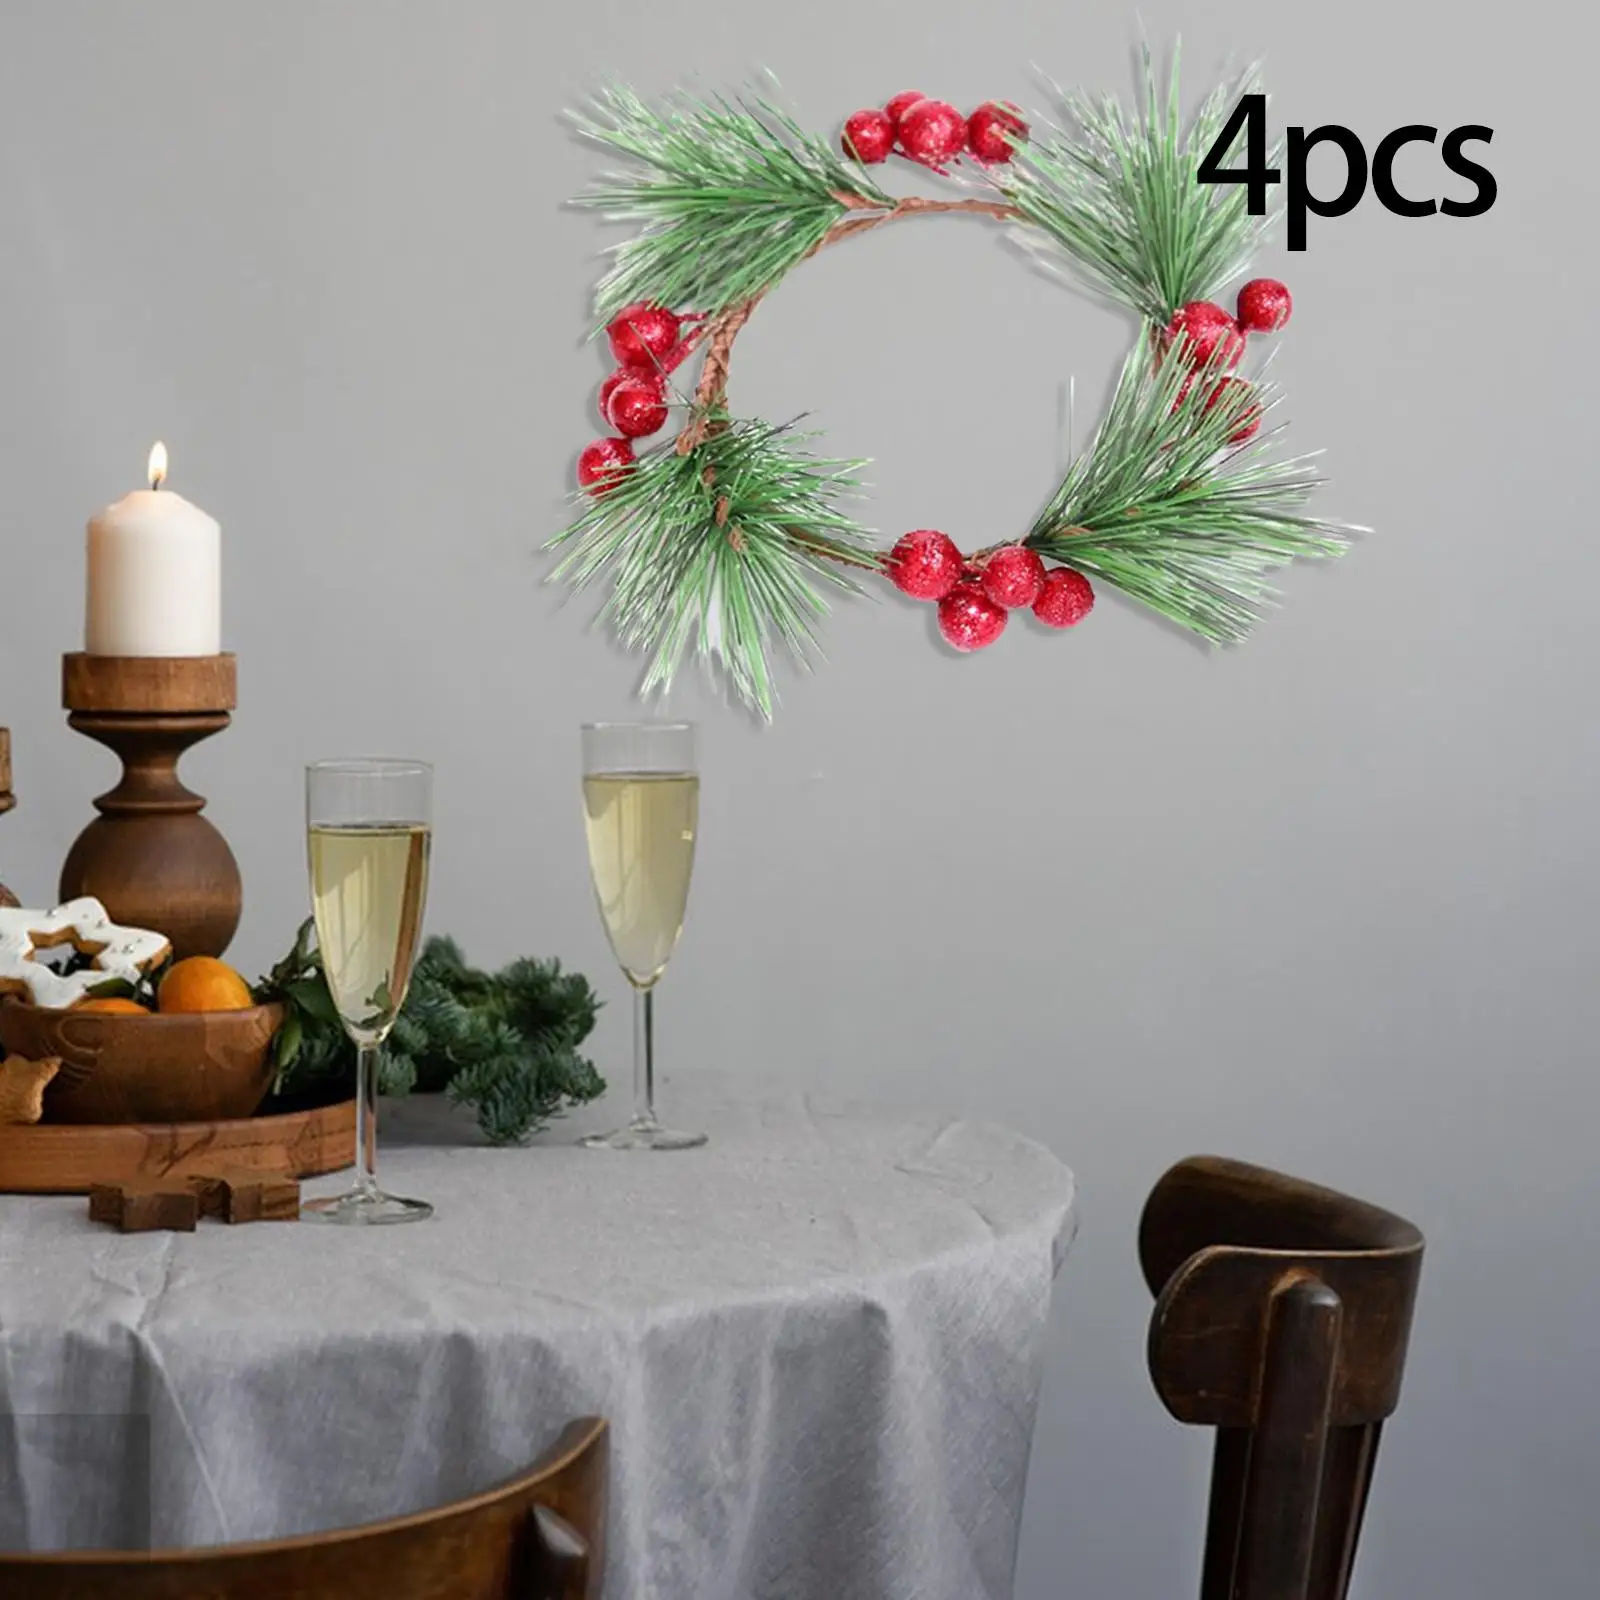 4x Candle Wreaths 3 Inches with Artificial Red Berries Decorative Small Wreath Candle Rings for Holiday Party Home Decor Accents